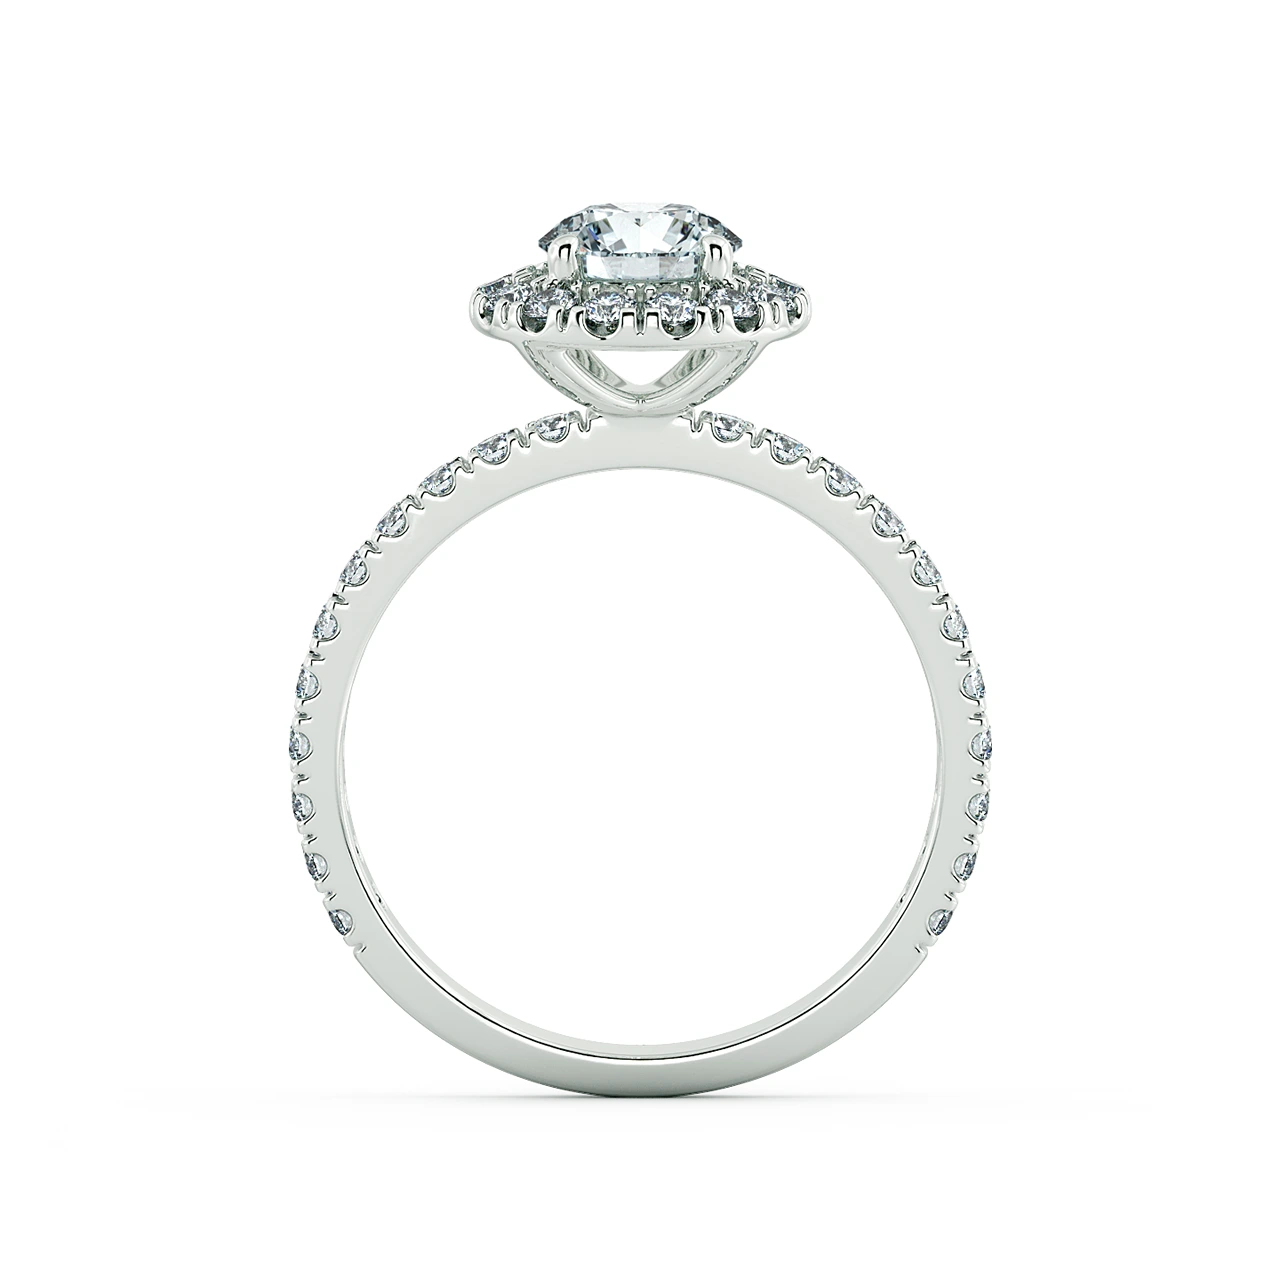 Single Halo Engagement Ring with Stylized NCH2106 5